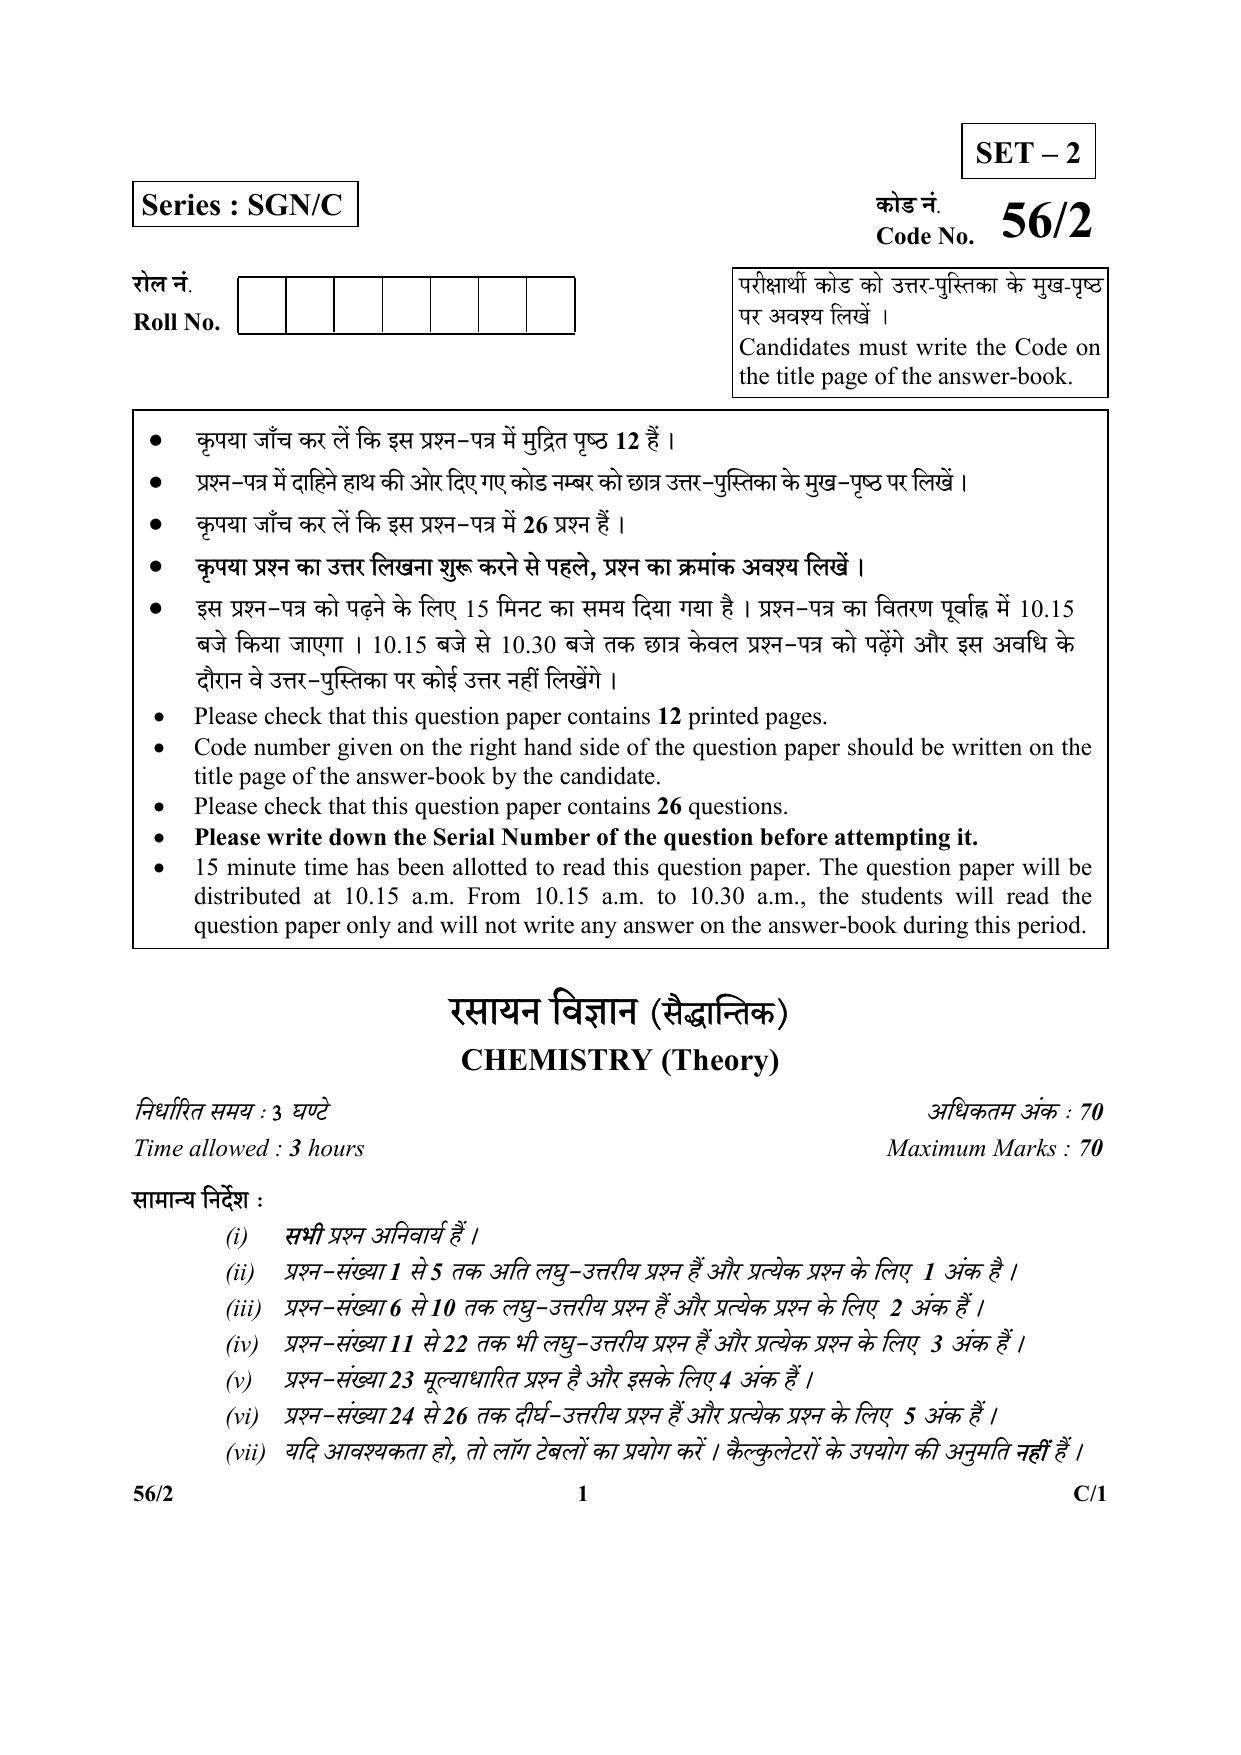 CBSE Class 12 56-2 (Chemistry) 2018 Compartment Question Paper - Page 1